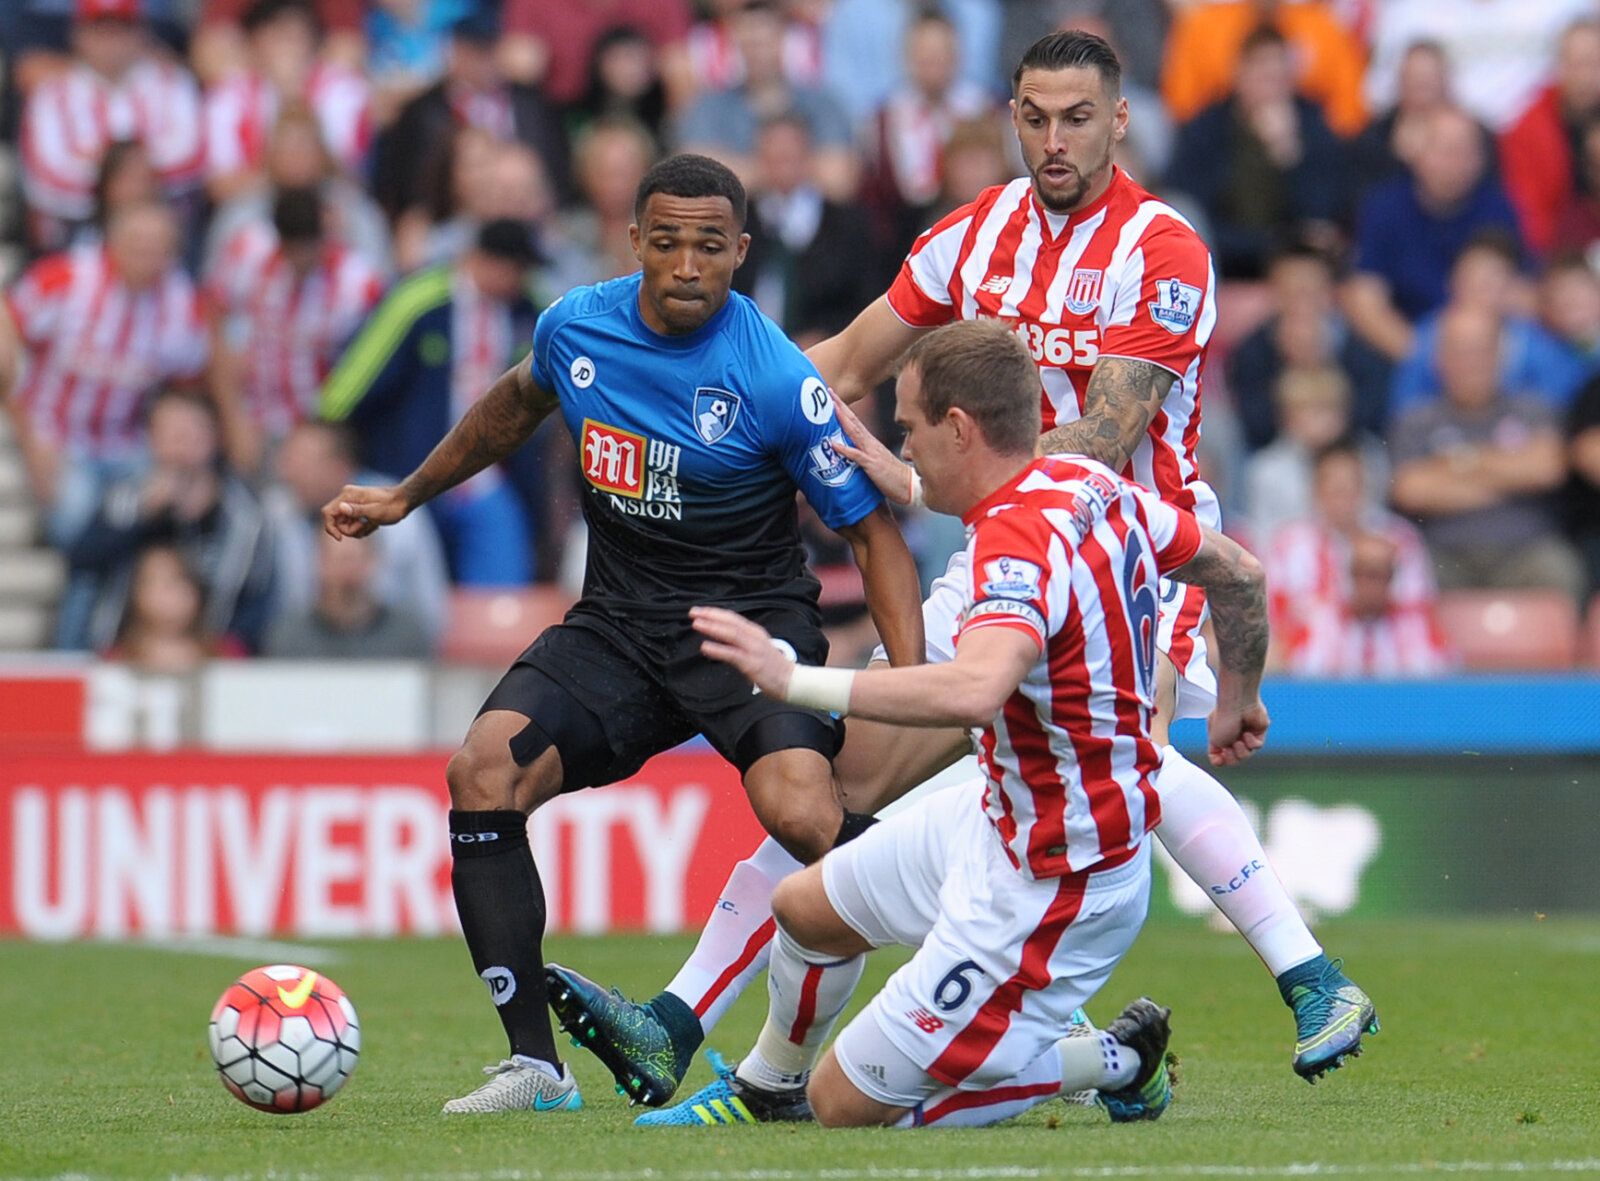 Football - Stoke City v AFC Bournemouth - Barclays Premier League - Britannia Stadium - 26/9/15 
Bournemouth's Callum Wilson is challenged by Stoke's Glenn Whelan and Geoff Cameron 
Mandatory Credit: Action Images / Paul Burrows 
Livepic 
EDITORIAL USE ONLY. No use with unauthorized audio, video, data, fixture lists, club/league logos or 